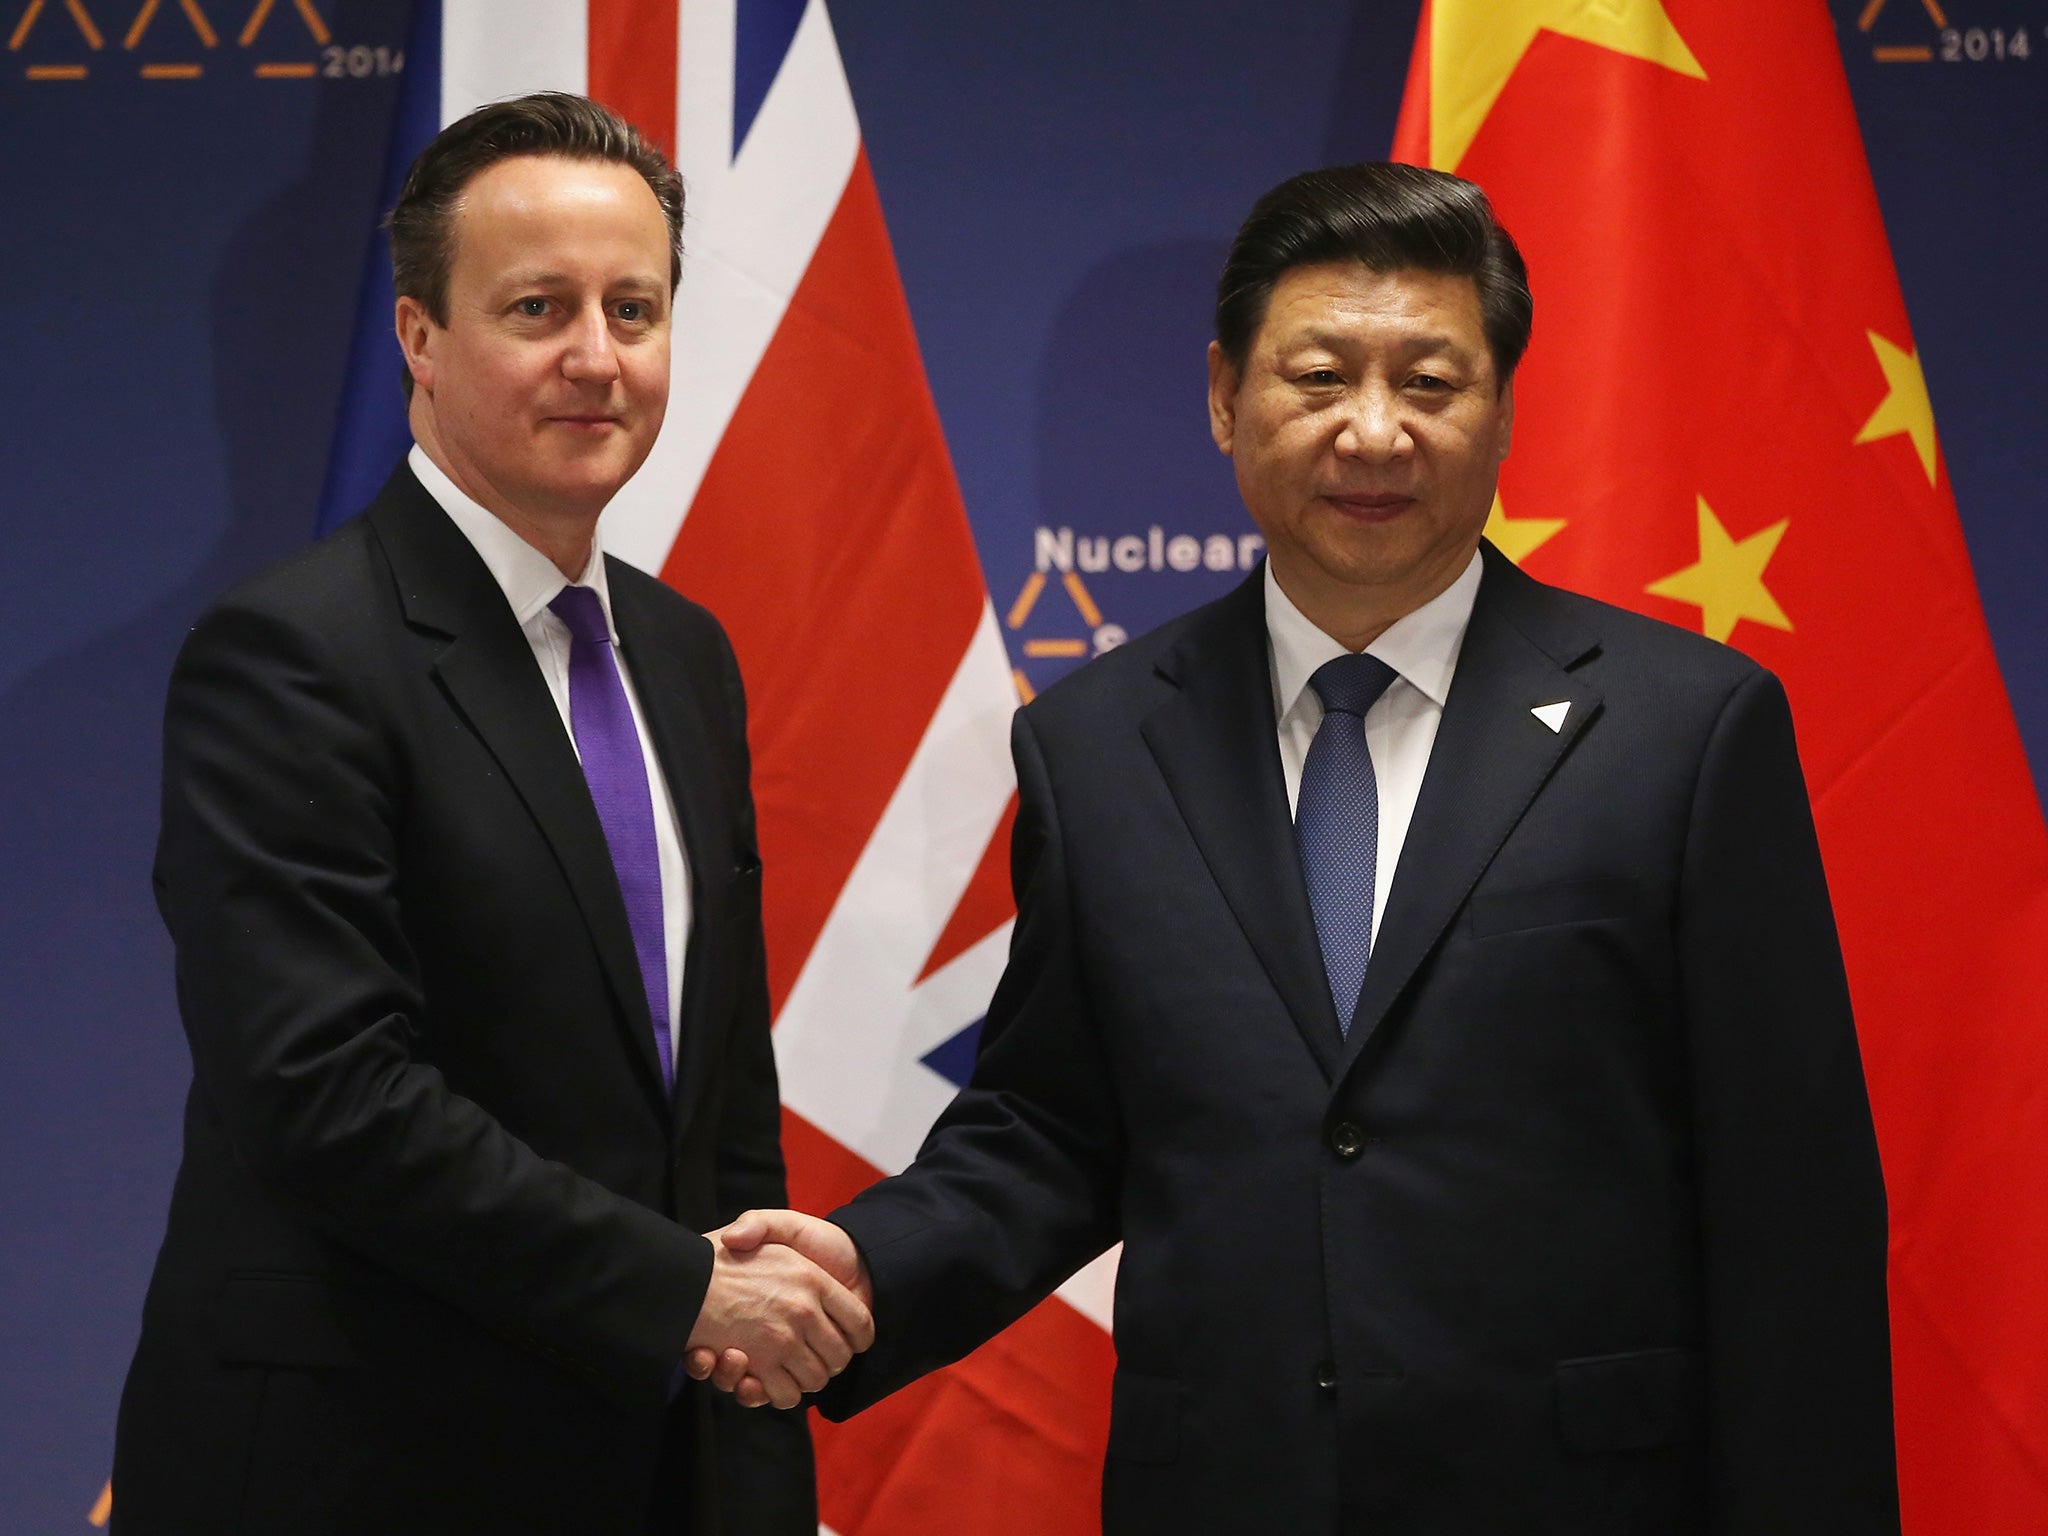 Prime Minister David Cameron has been urged to raise the issue with Chinese President Xi Jinping